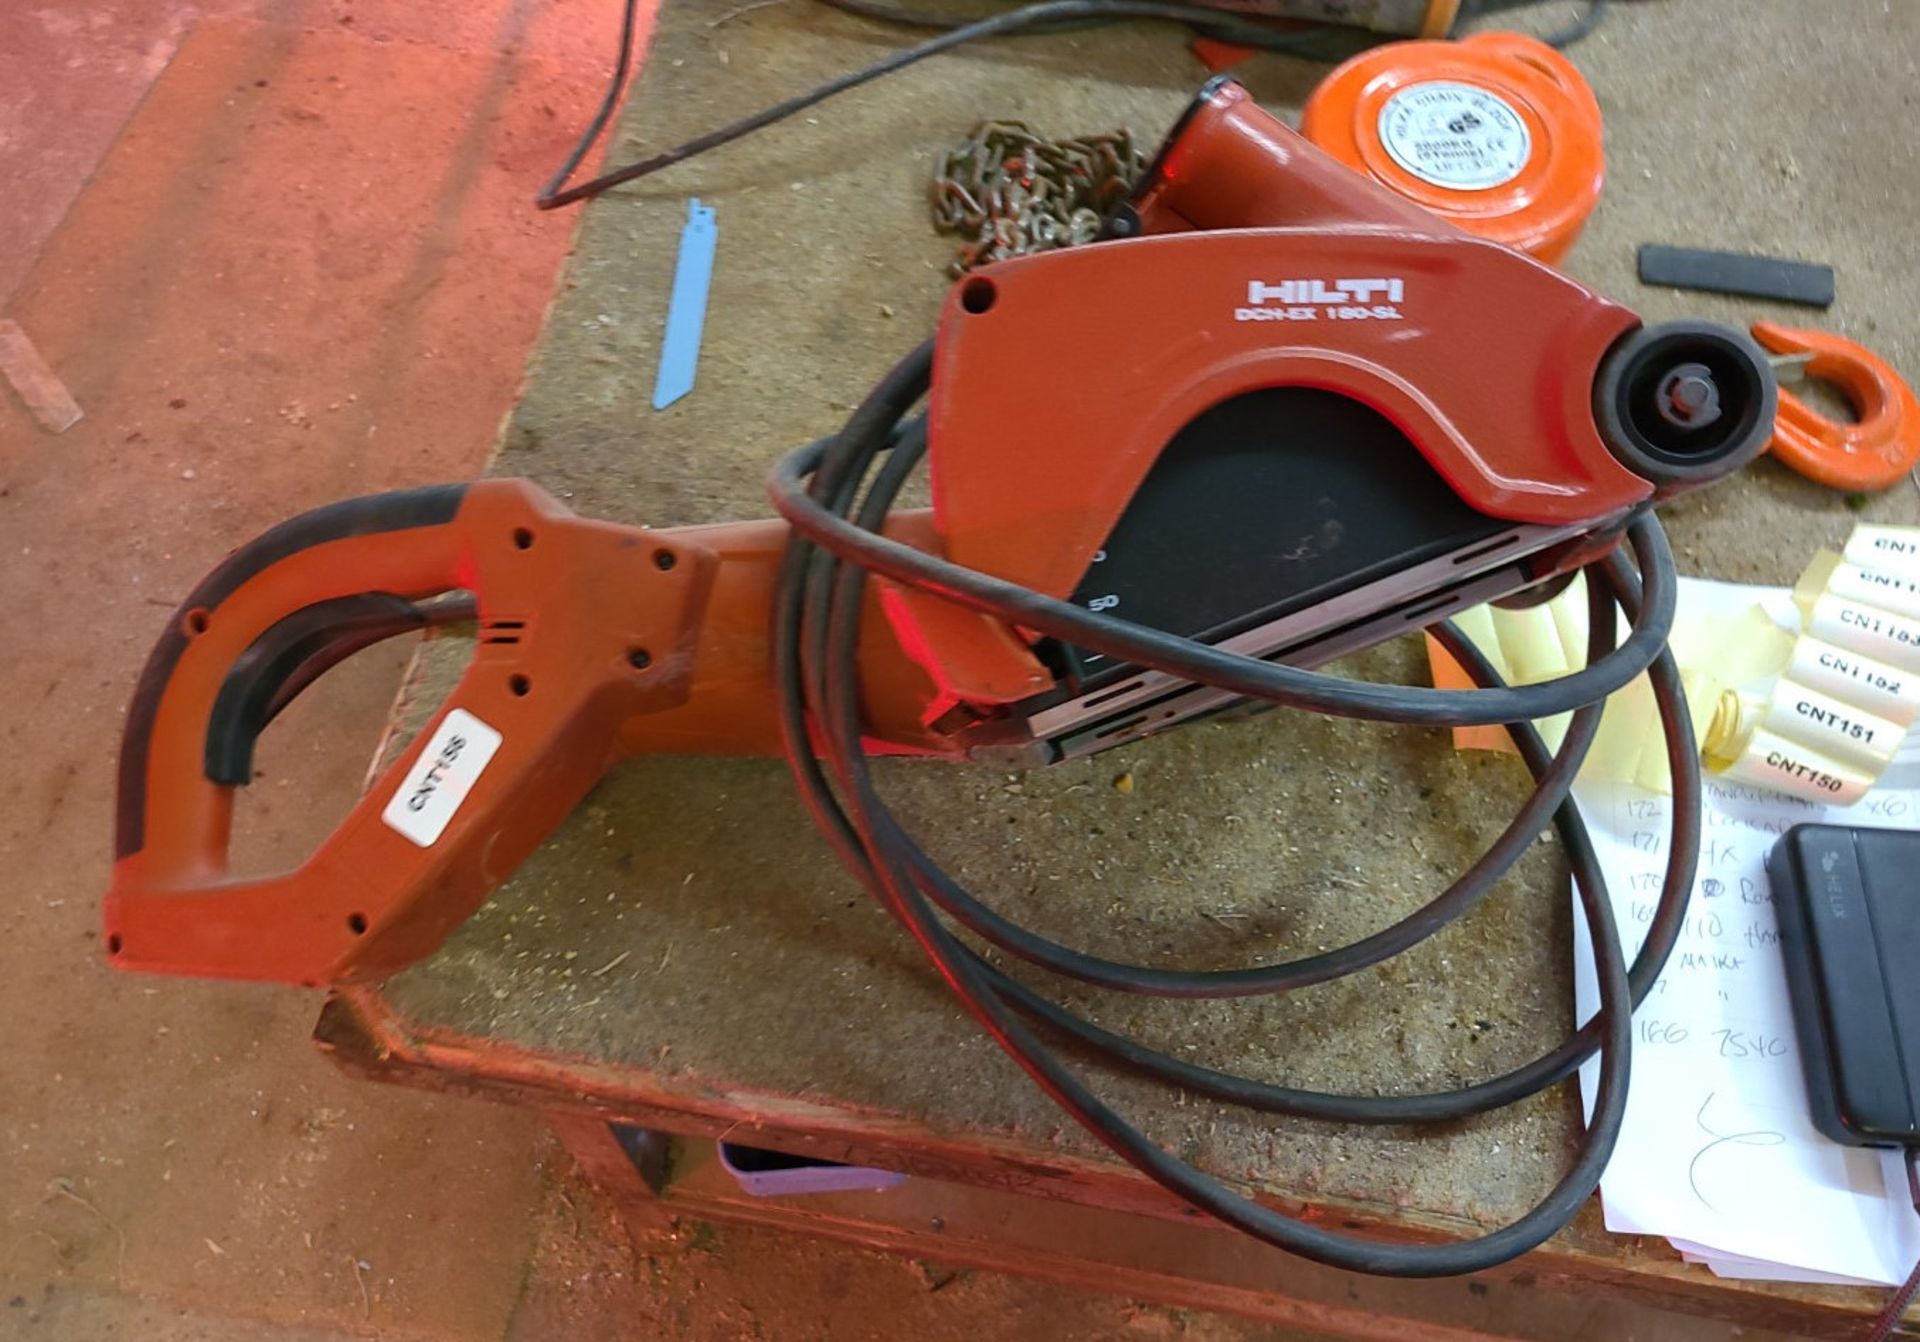 1 x Hilti Dch-Ex 180-Sl Wall Chaser - Ref: CNT156 - CL846 - Location: Oxford OX2This lot is from a